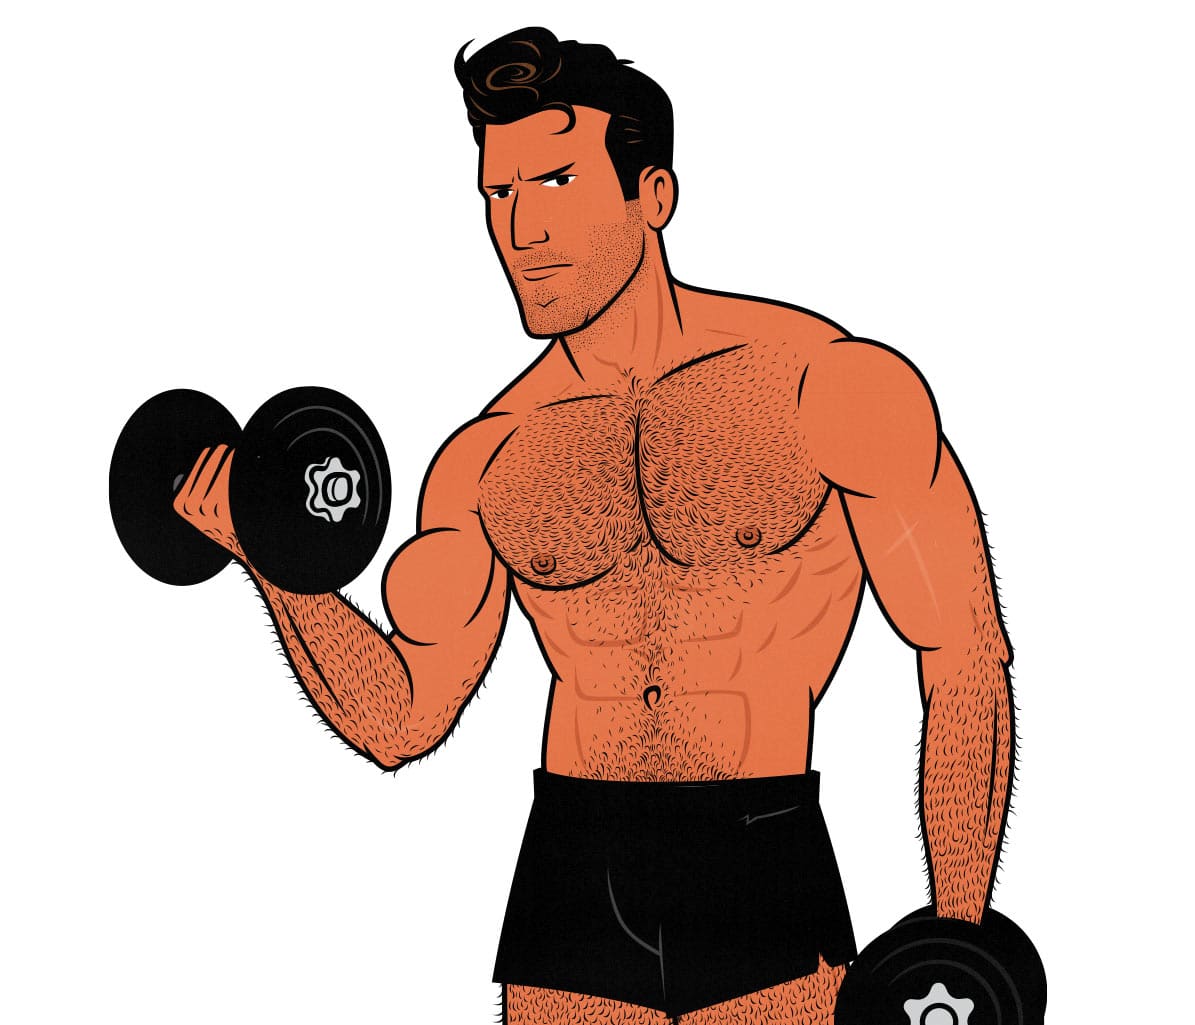 Illustration of a weight lifter doing biceps curls to build bigger arms.